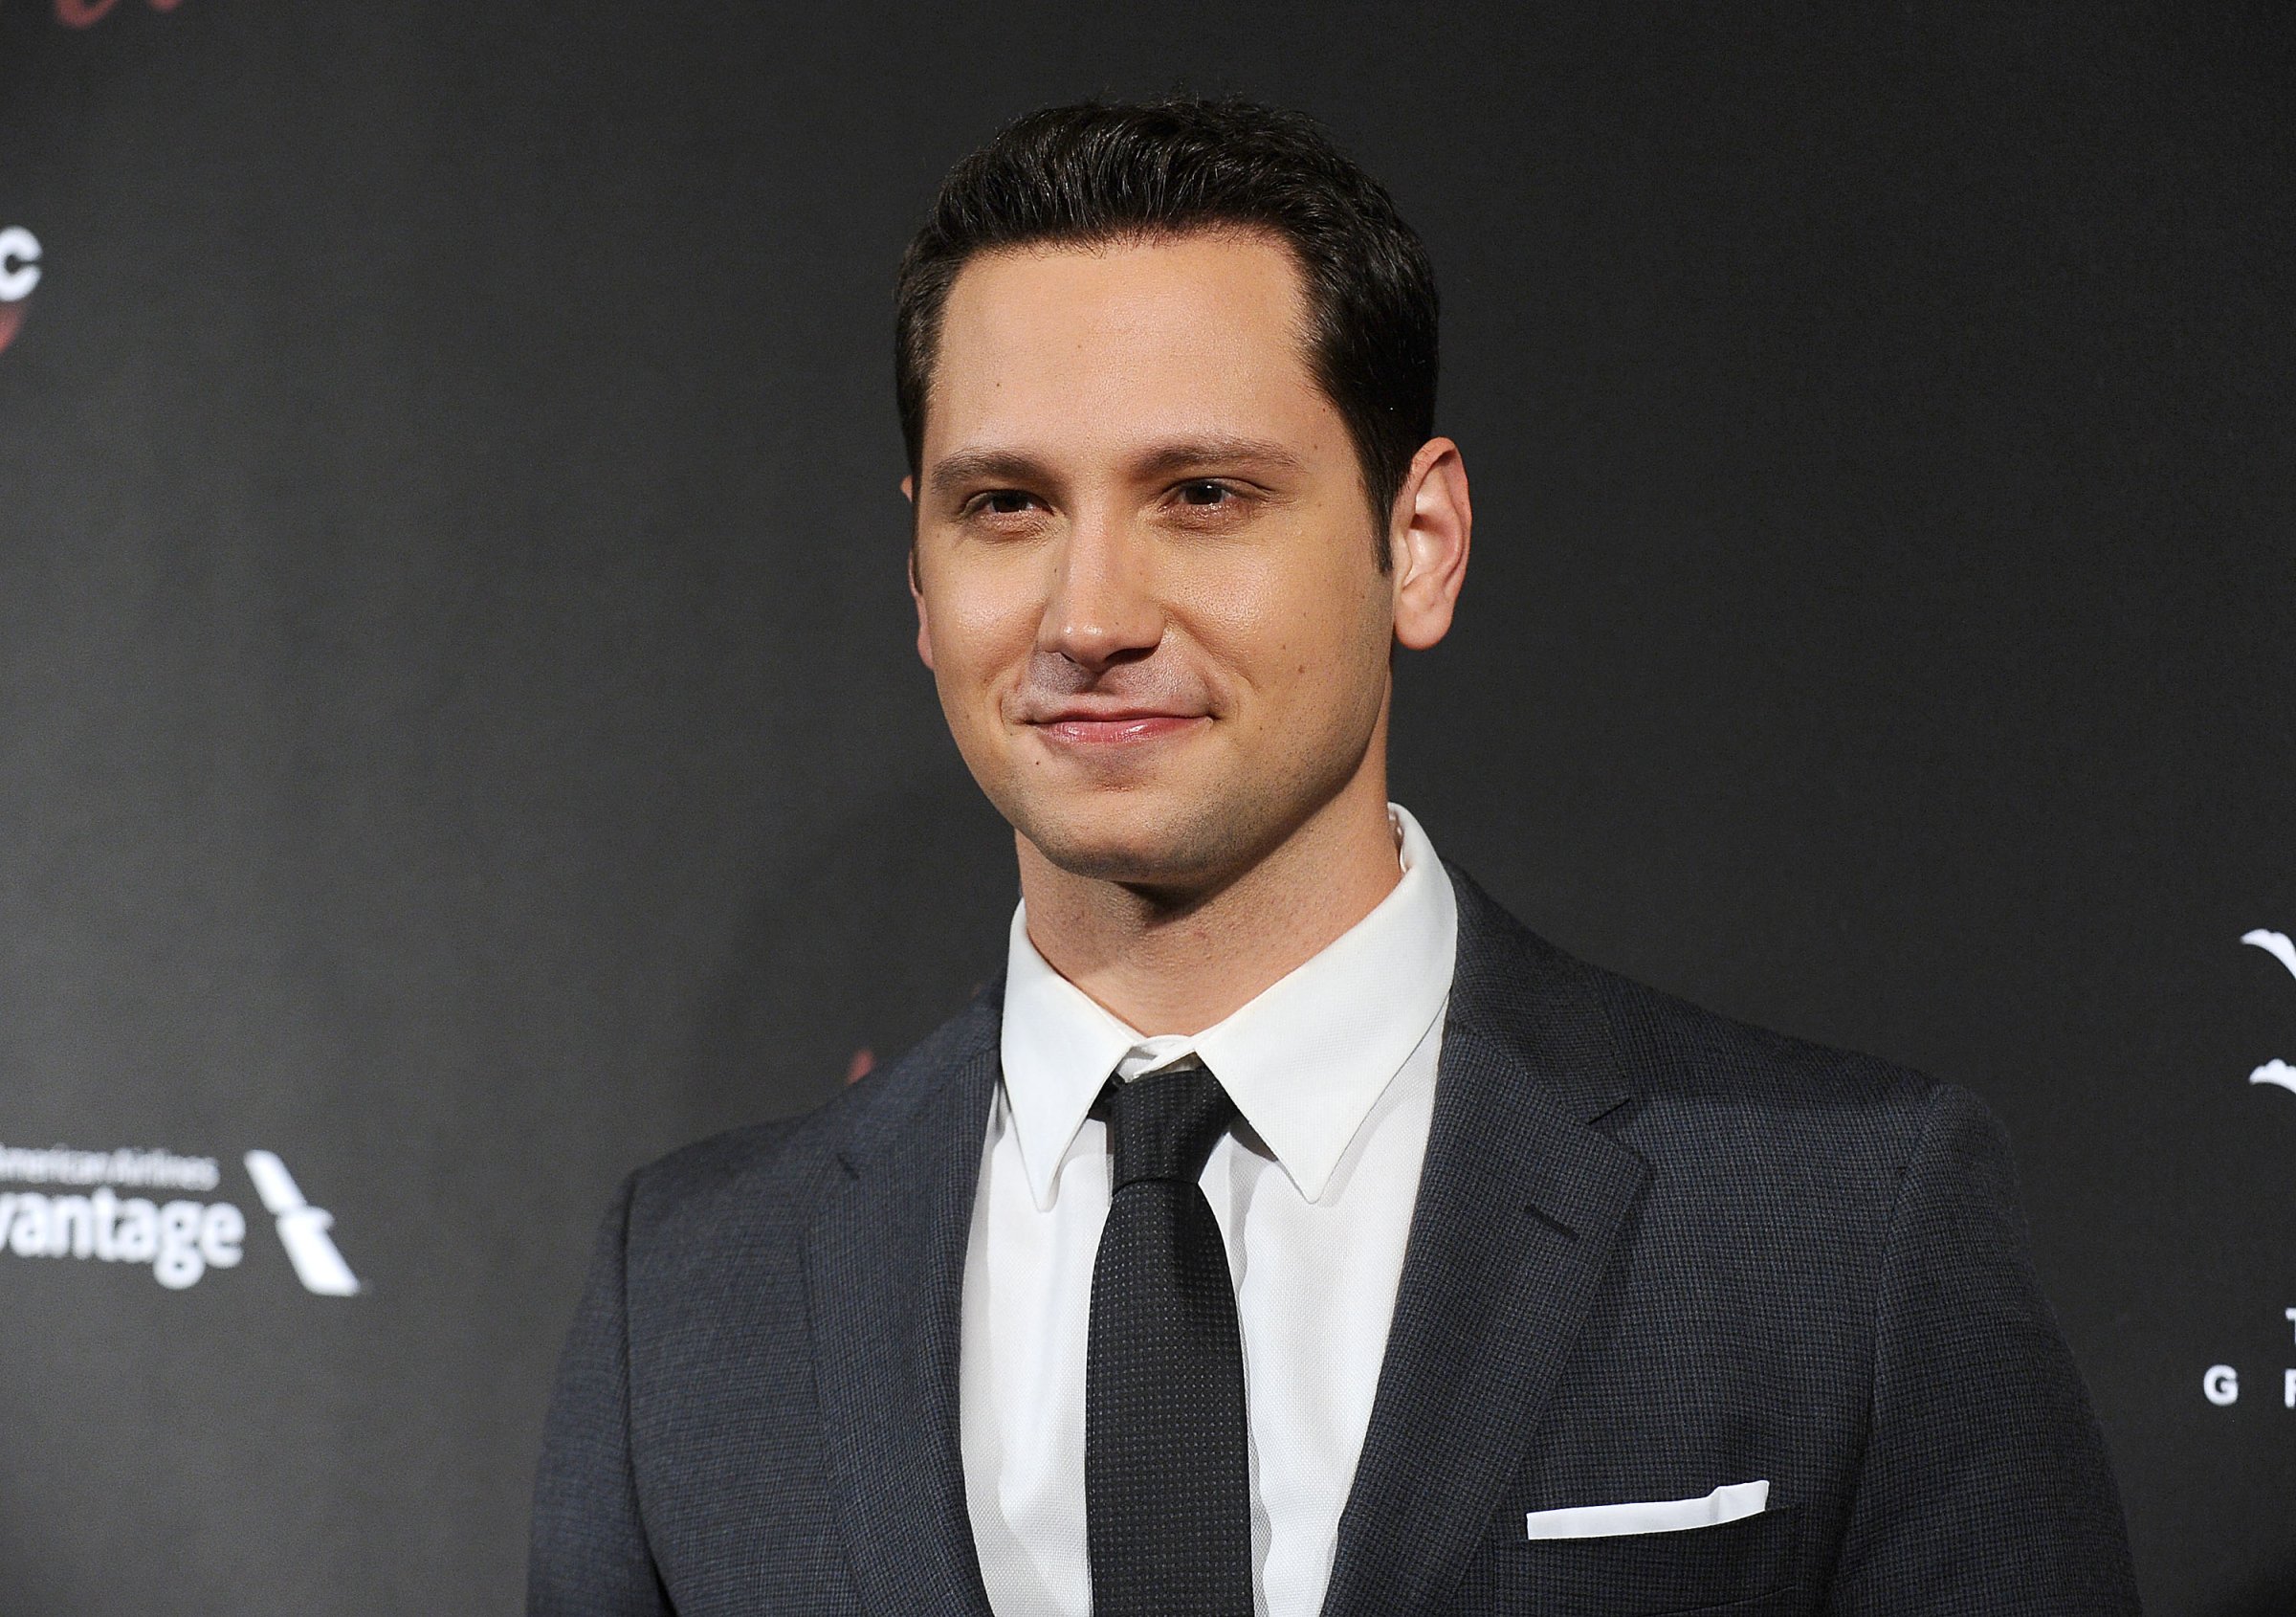 Actor Matt McGorry attends the season 3 premiere of "How To Get Away With Murder" at Pacific Theatre at The Grove on September 20, 2016 in Los Angeles, California.